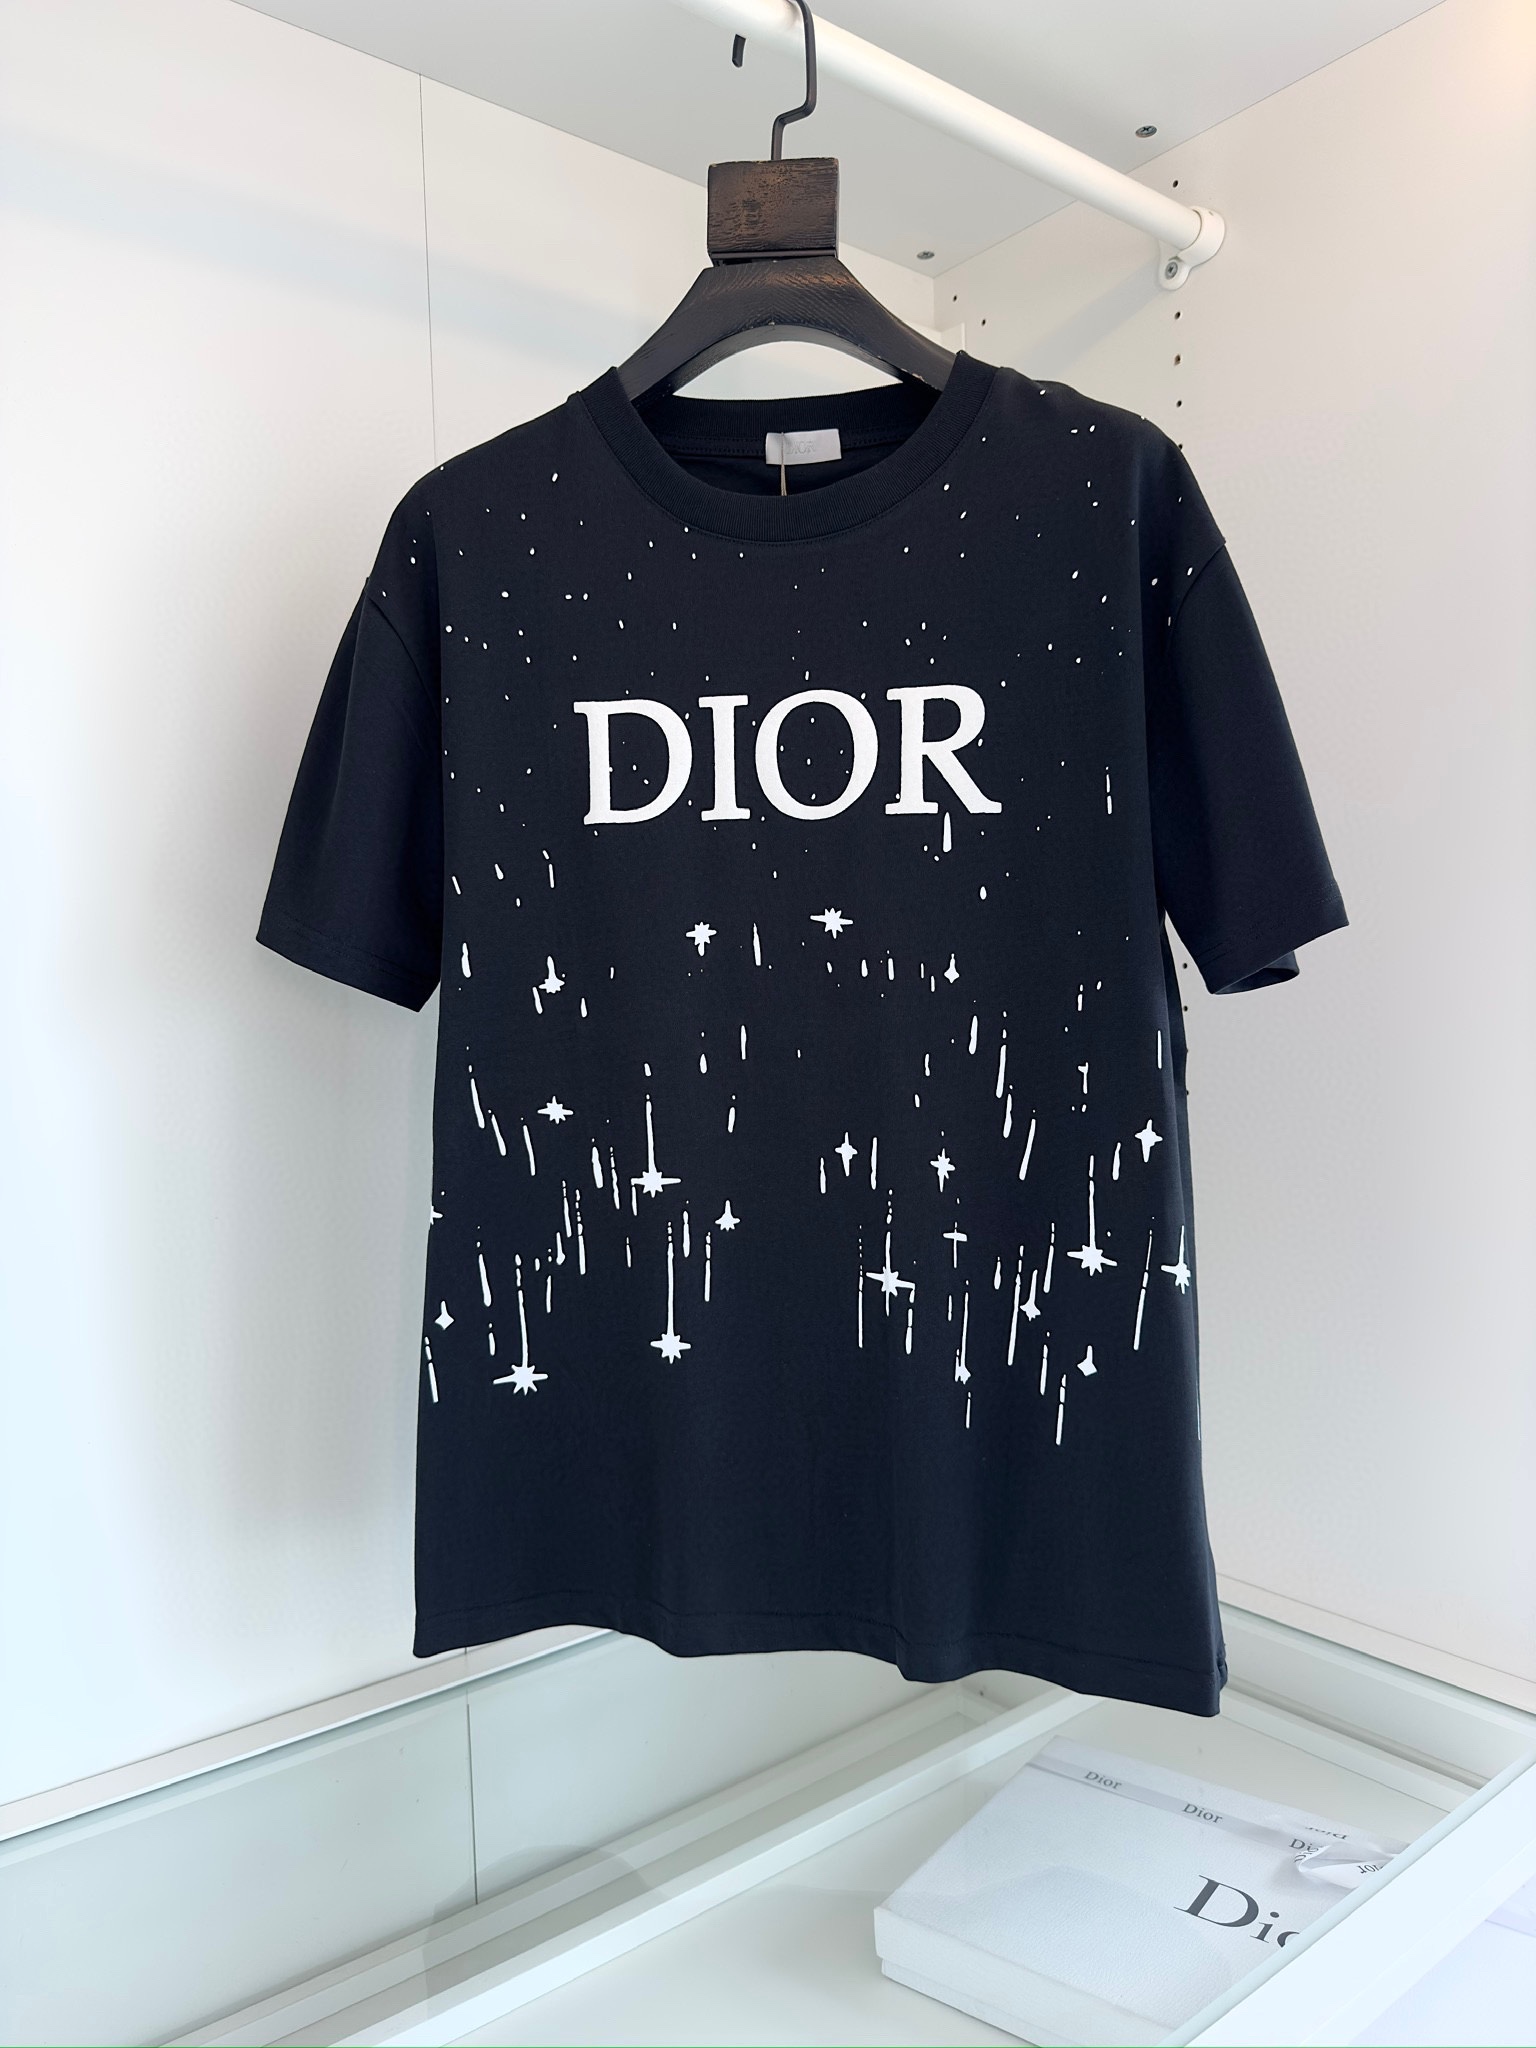 Dior Clothing T-Shirt Black White Printing Unisex Cotton Knitted Knitting Spring/Summer Collection Fashion Short Sleeve